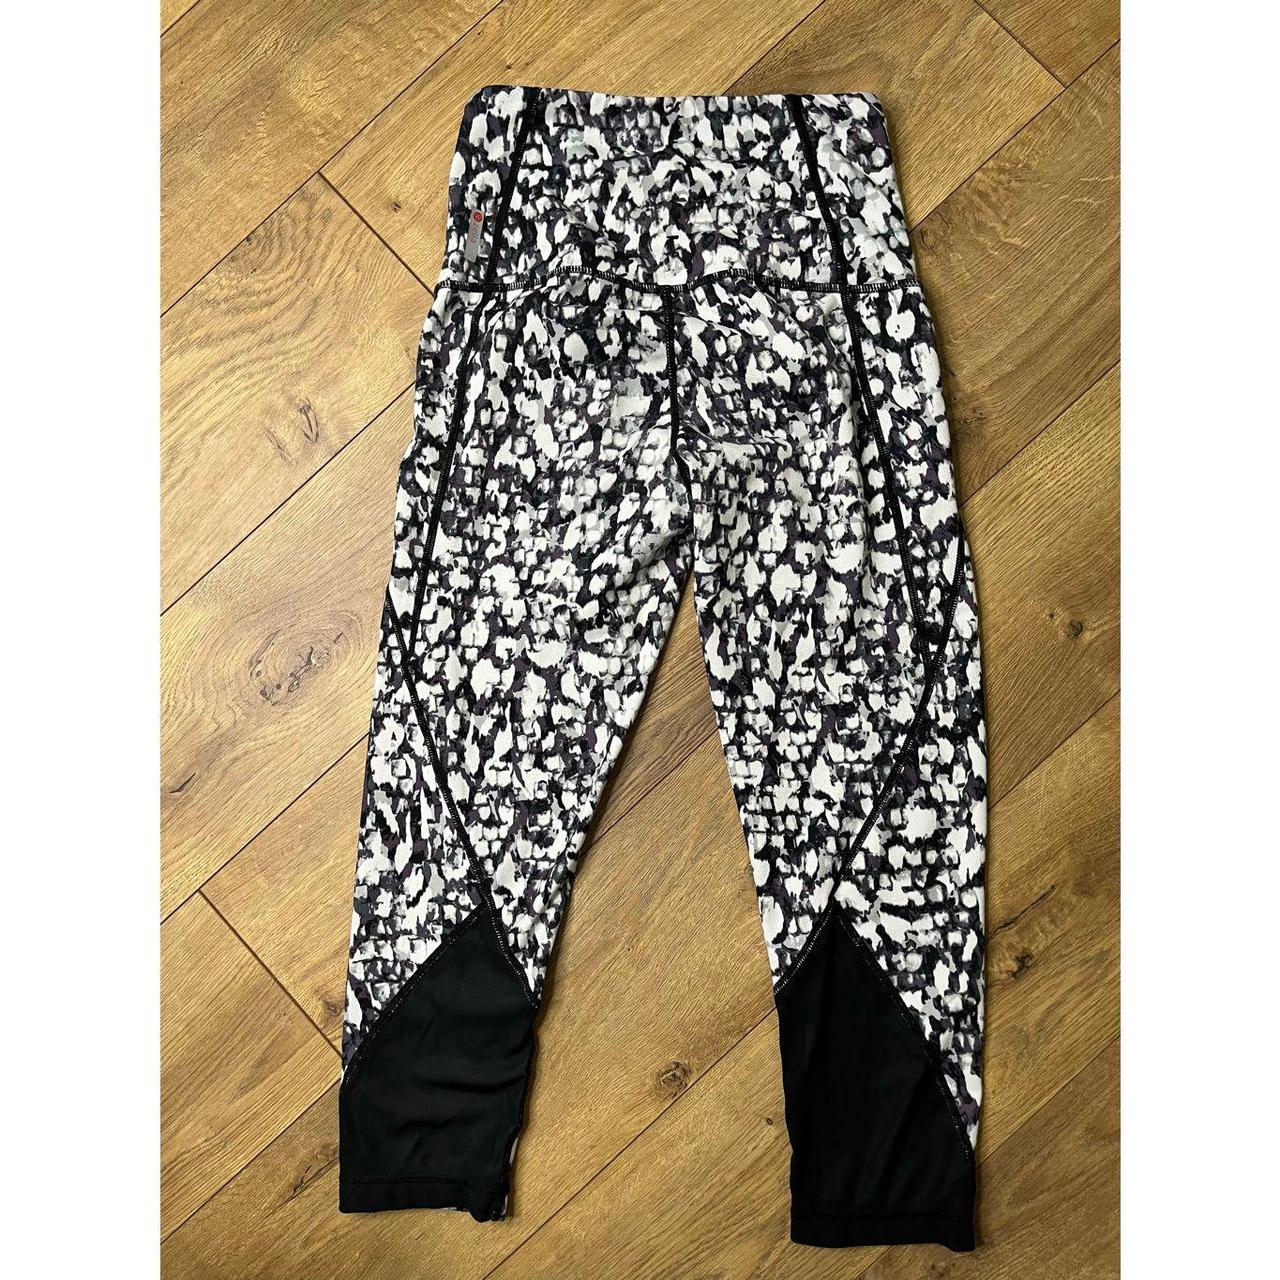 Product Image 2 - Women’s Zella Black and White